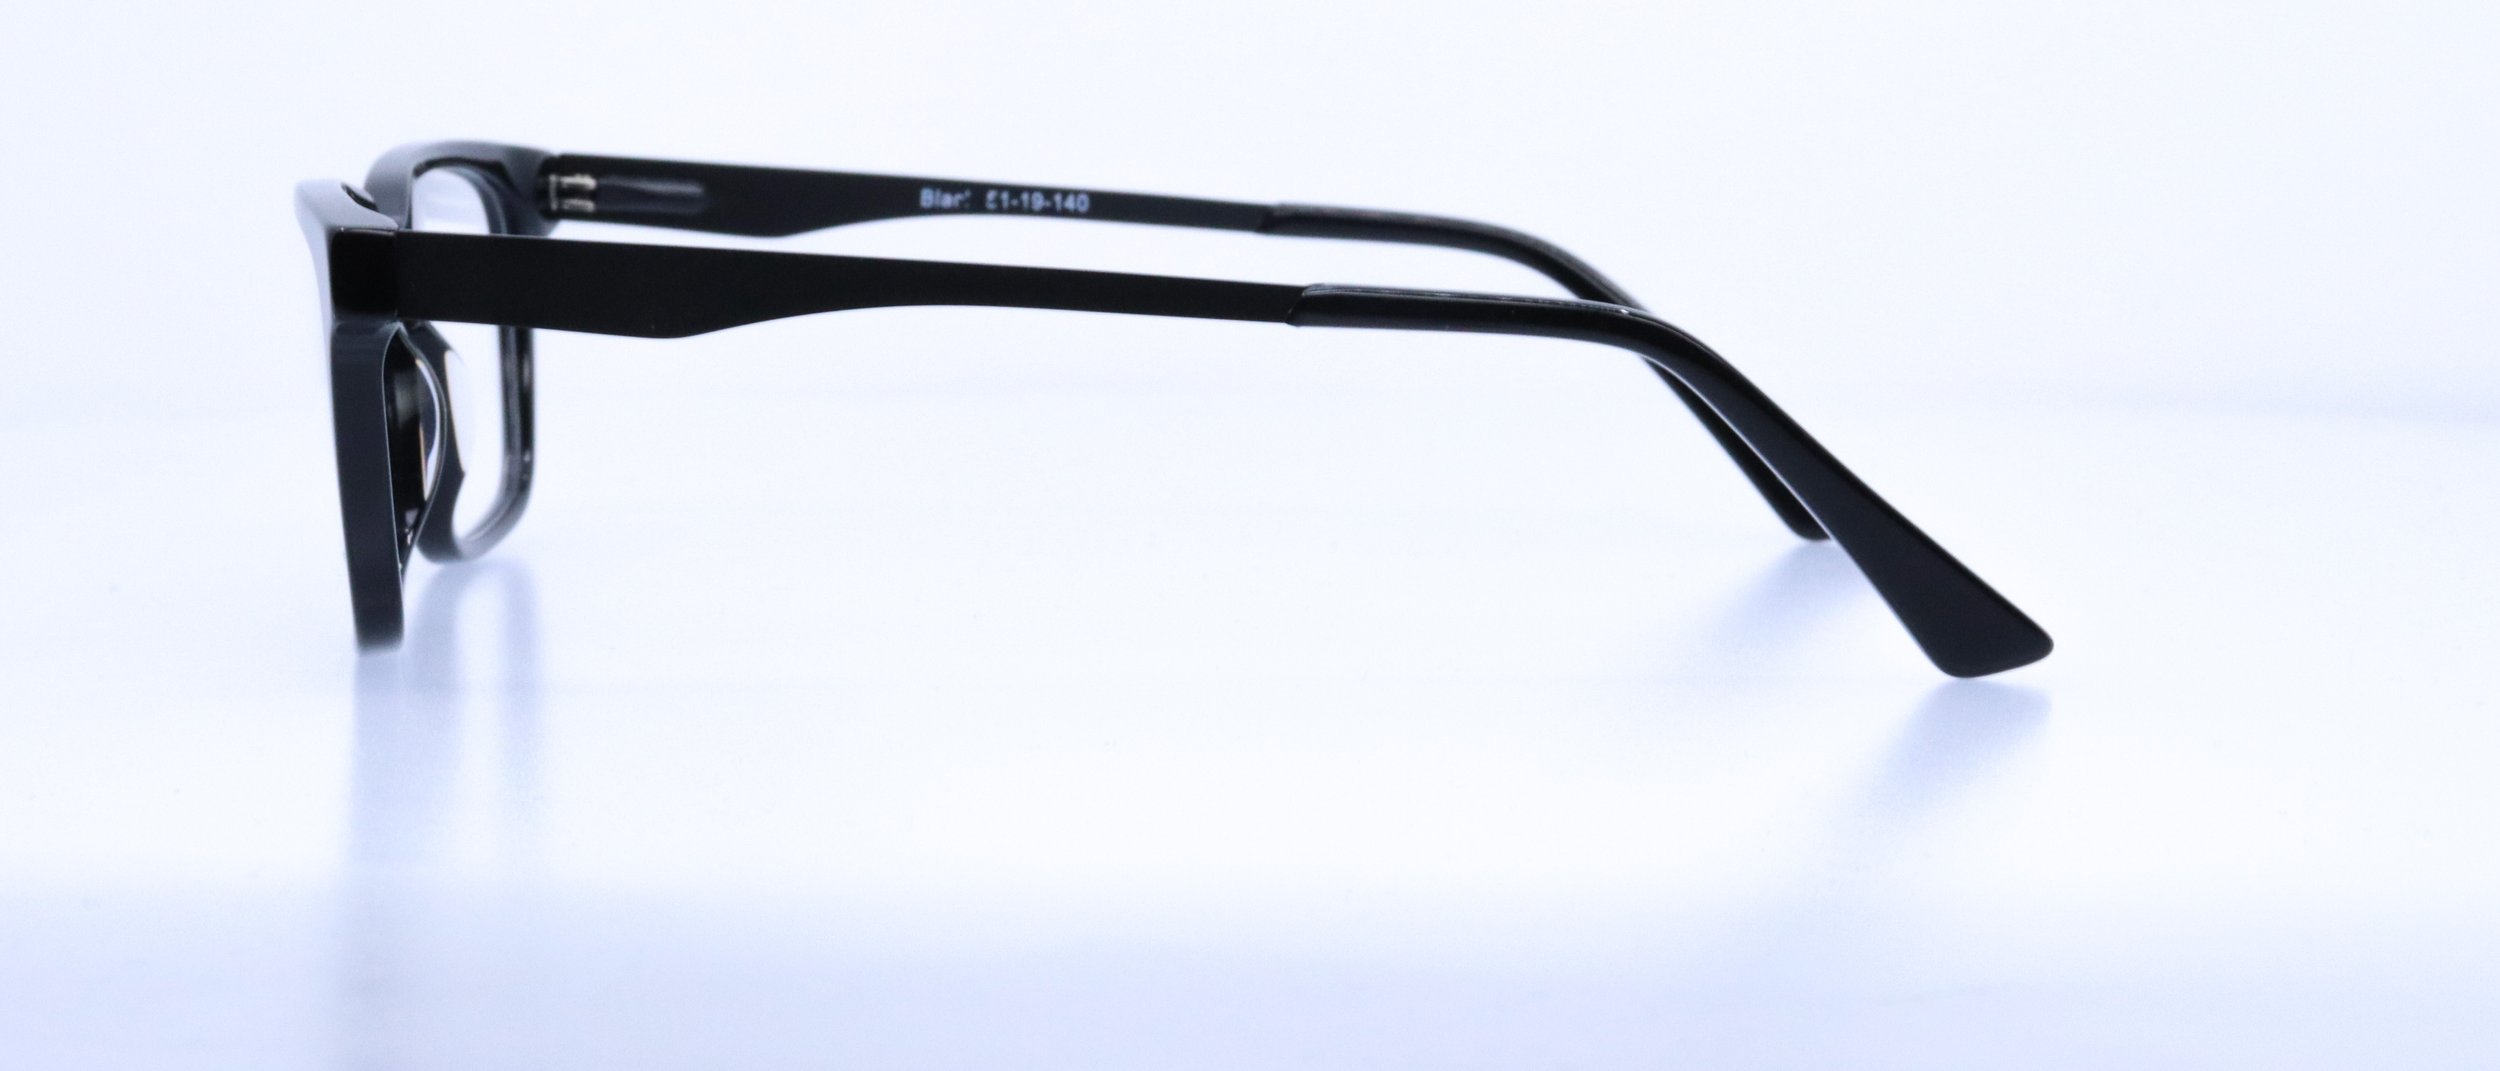  EH502: 52-19-140, Available in Black or Brown/Tortoise 